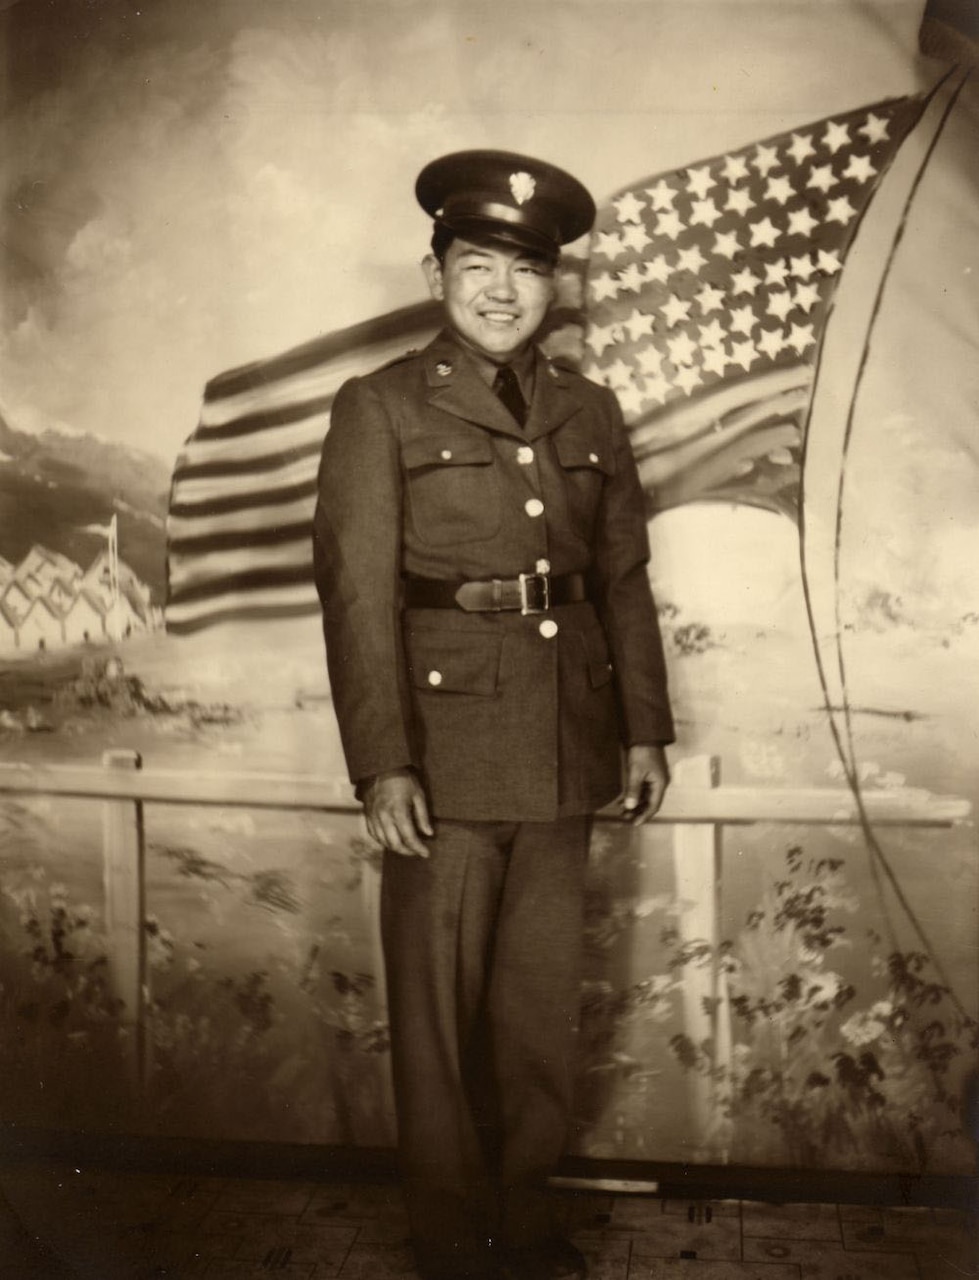 A man in uniform poses in front of a painting of a U.S. flag.